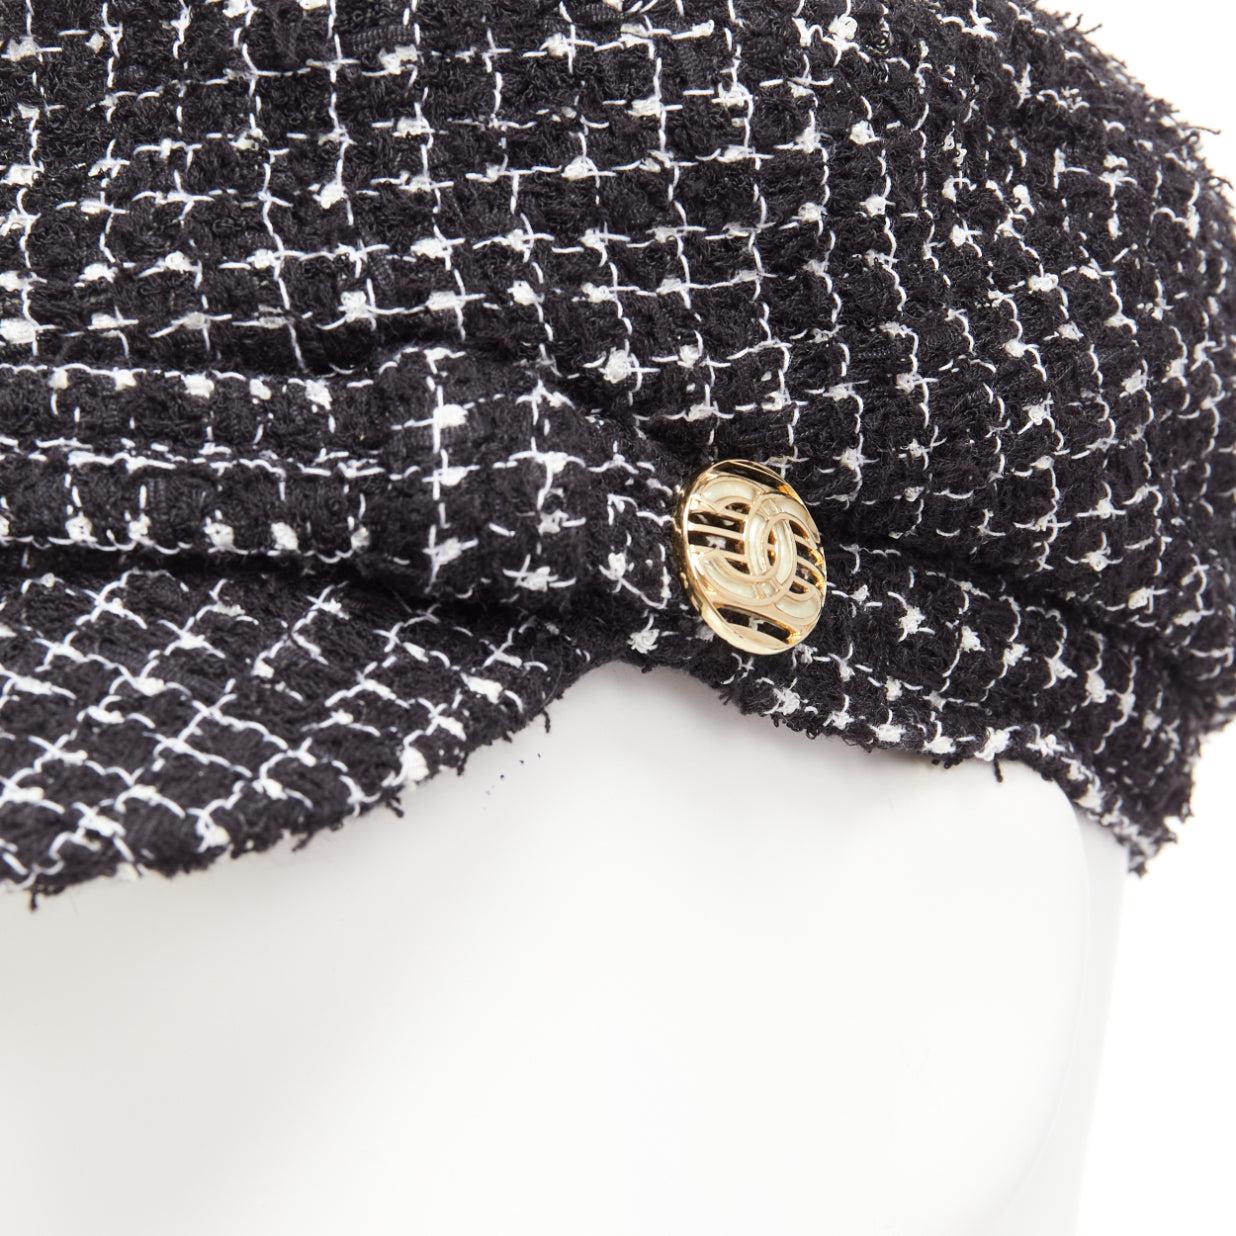 CHANEL gold CC logo button black white cotton tweed newsboy hat S
Reference: TGAS/D01059
Brand: Chanel
Designer: Virginie Viard
Material: Tweed
Color: Black, White
Pattern: Tweed
Lining: Black Fabric
Extra Details: Gold CC logo